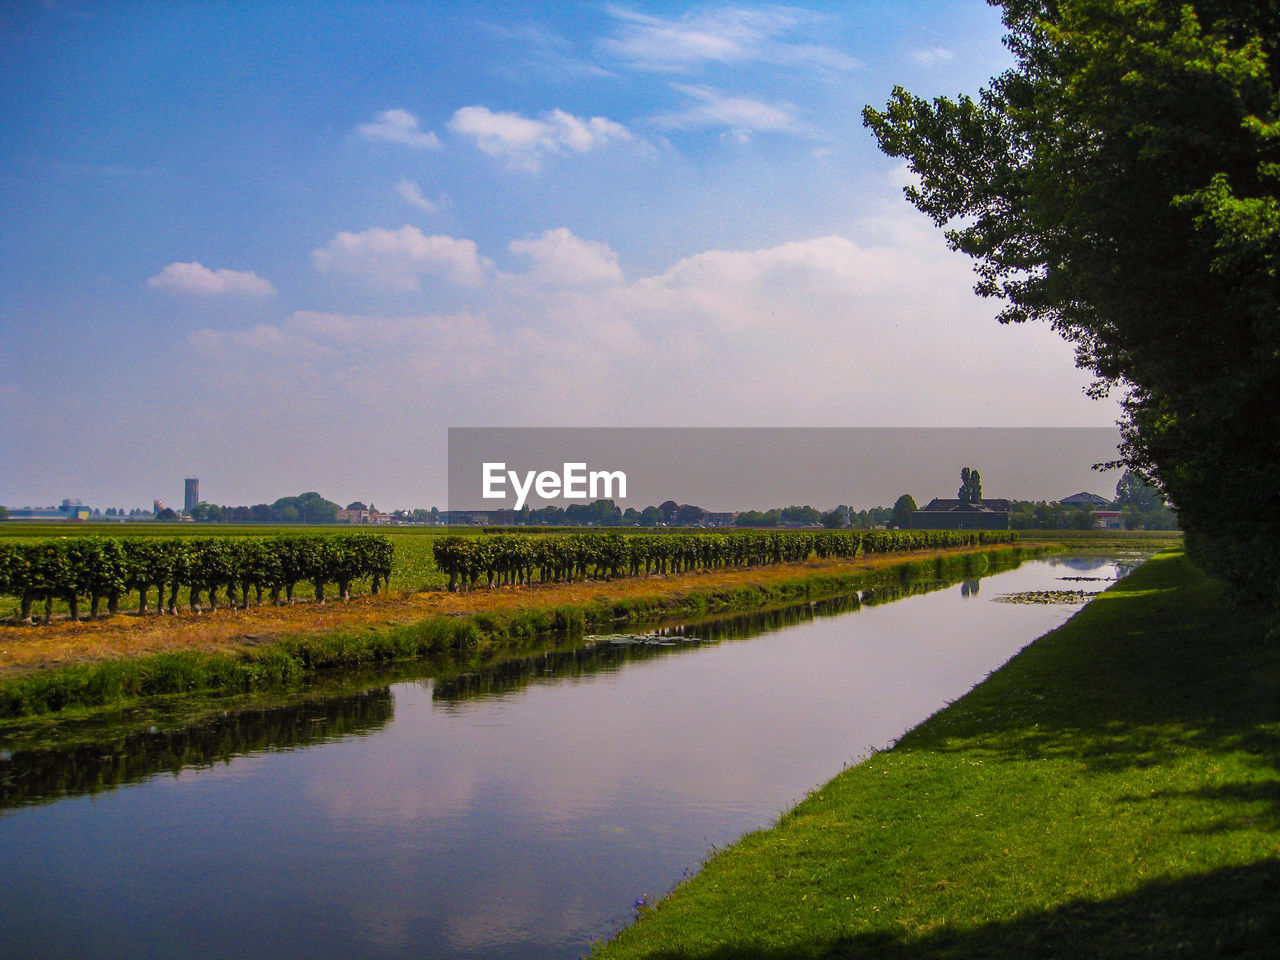 Netherlands countryside scene, with a canal and reflections on water.